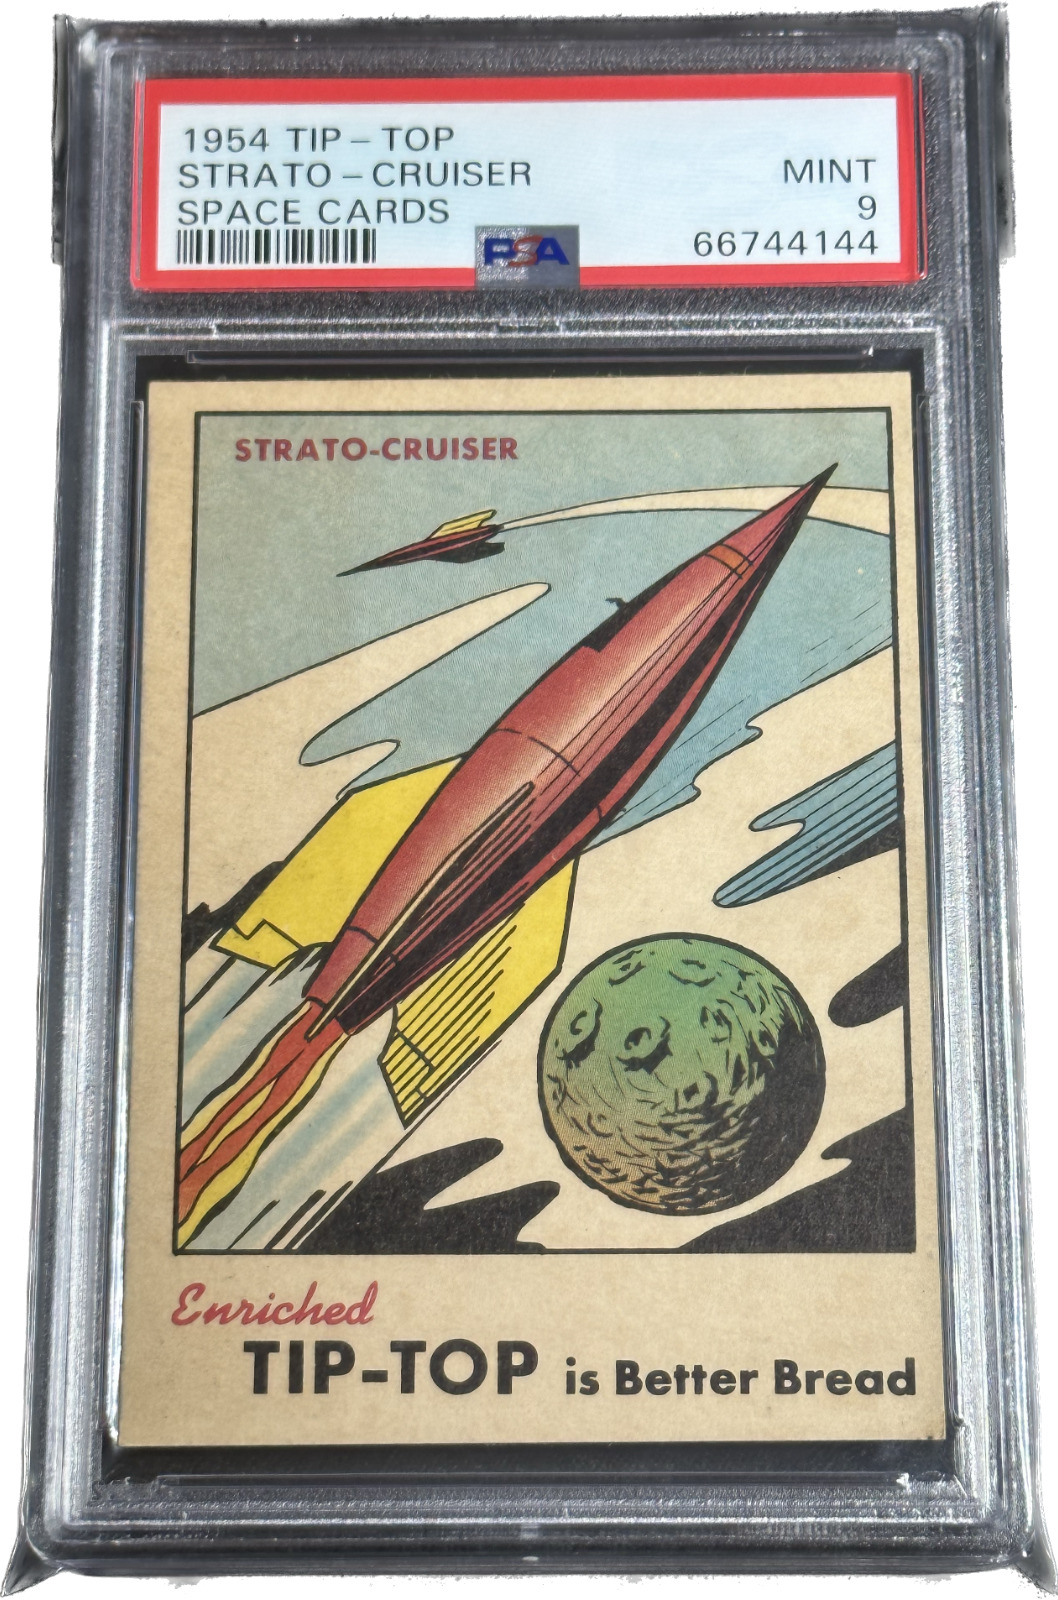 1954 Tip-Top Space Cards Strato-Cruiser Vintage PSA 9 MINT POP 1 NONE HIGHER